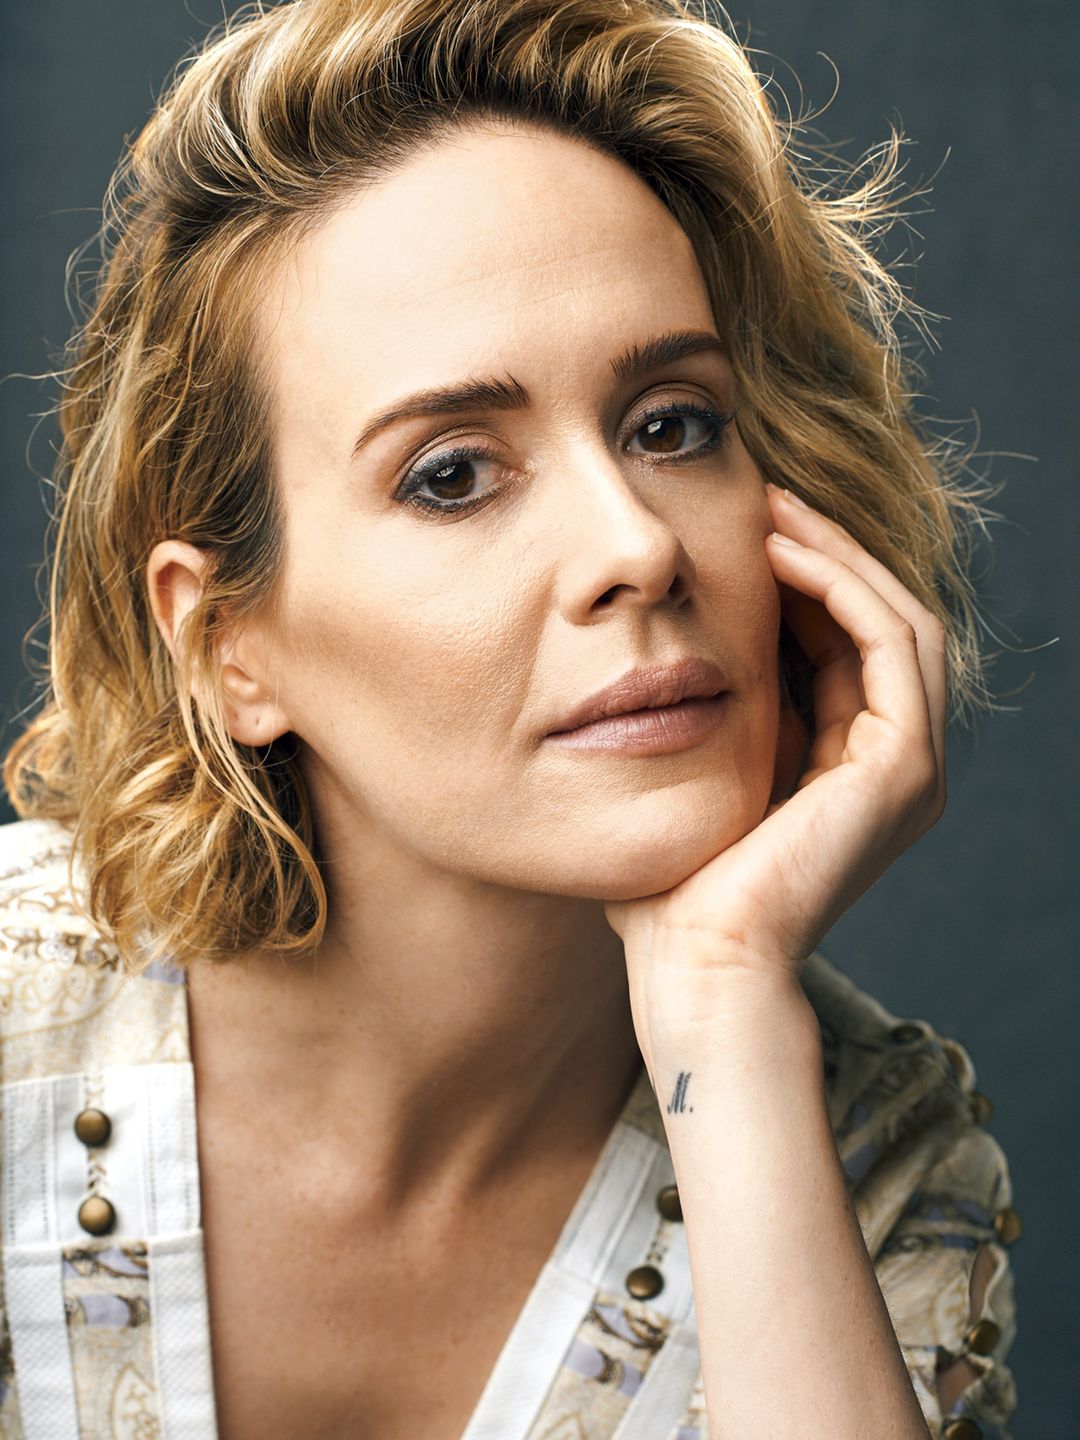 Sarah Paulson who is her mother